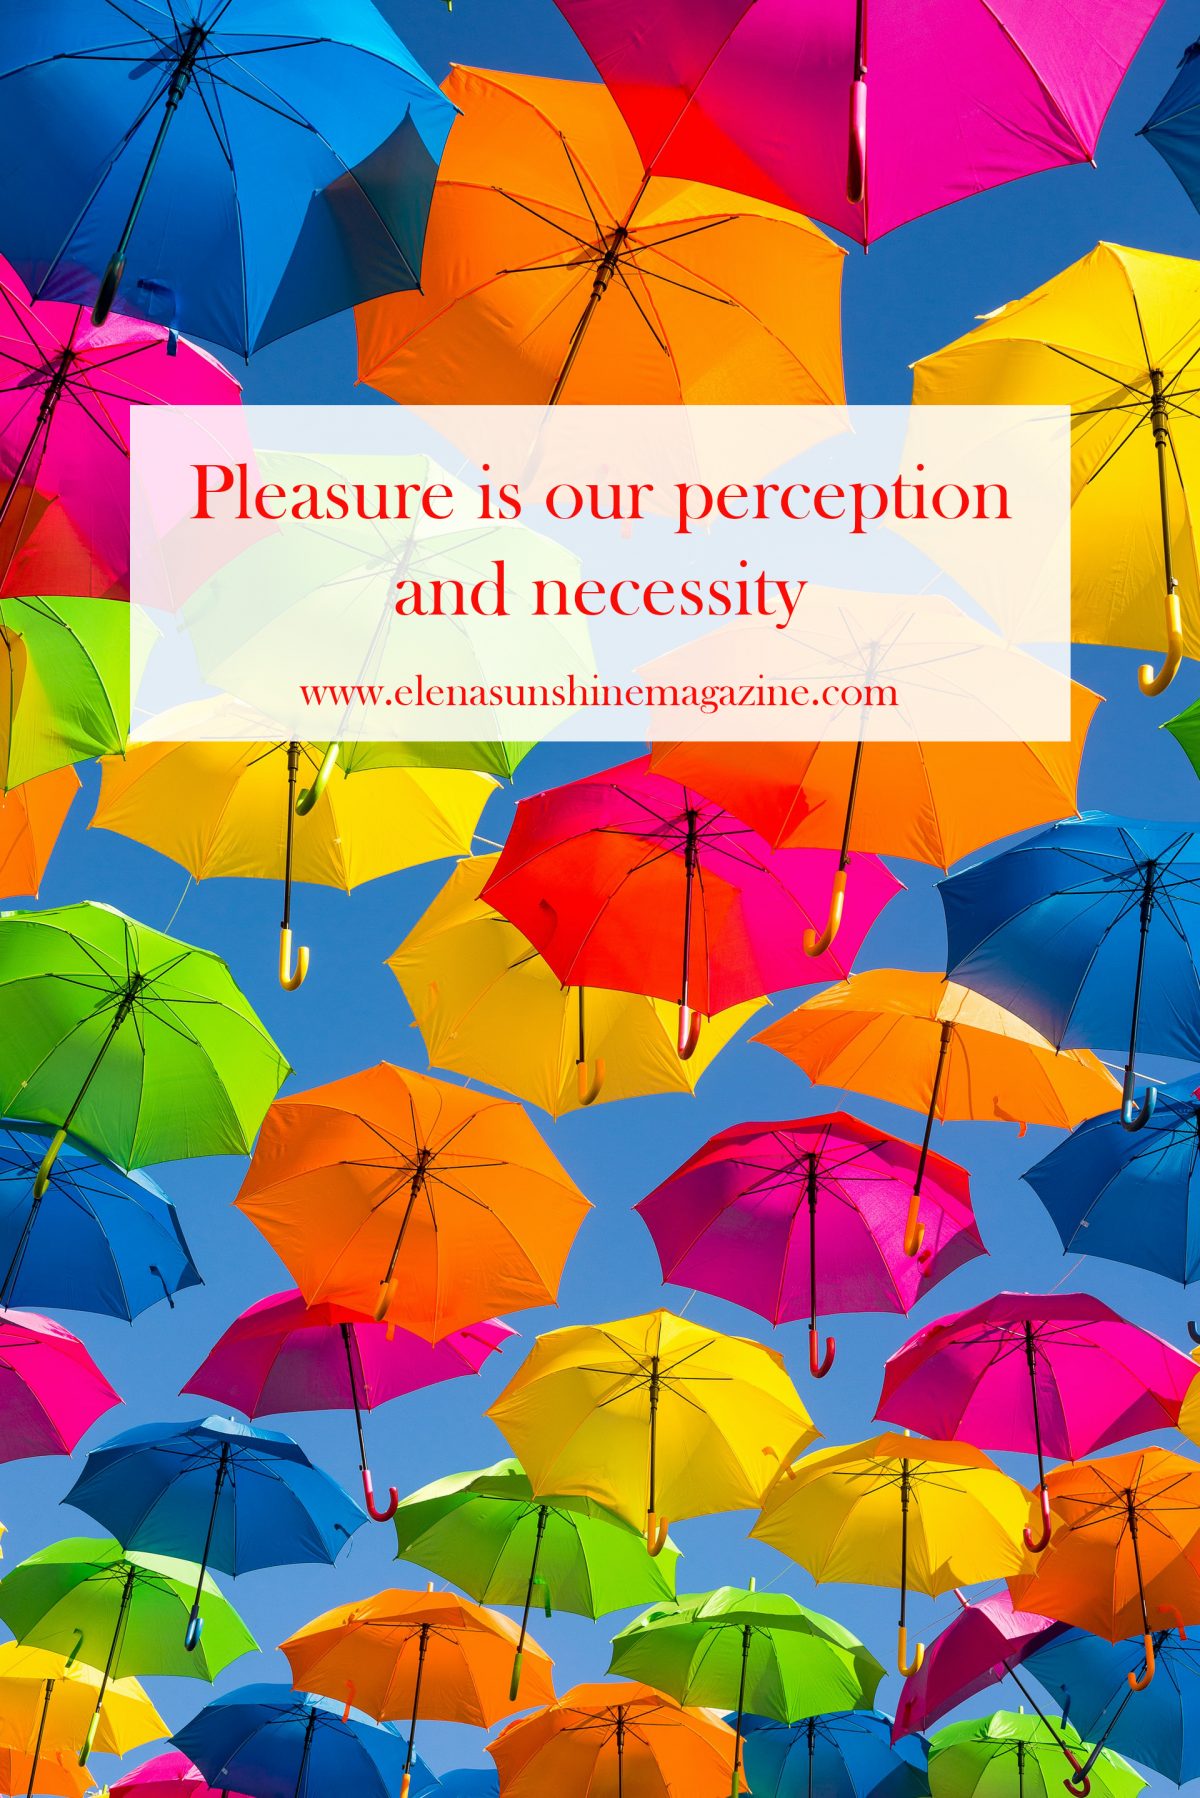 Pleasure is our perception and necessity